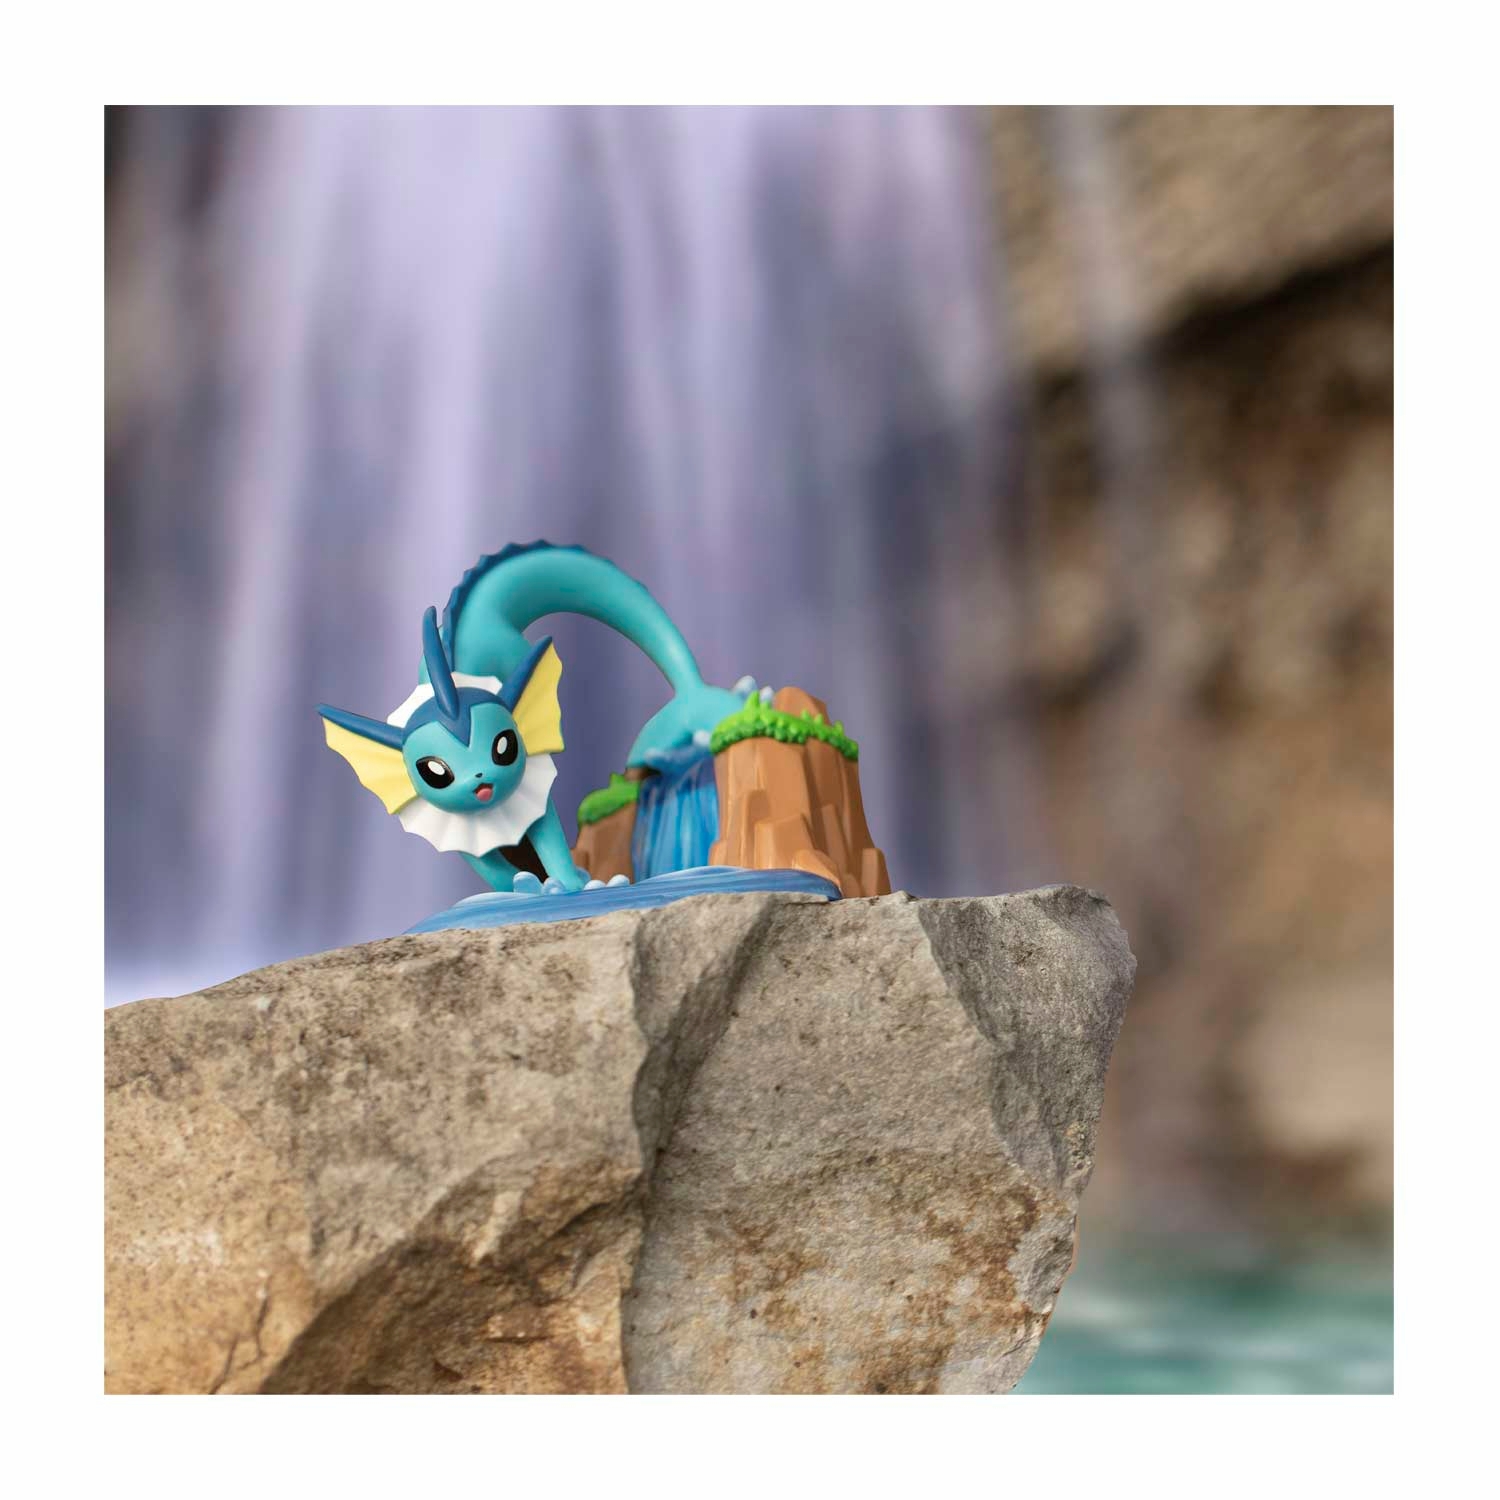 Vaporeon_Figure_An_Afternoon_with_Eevee_Friends_Lifestyle_Image.jpg